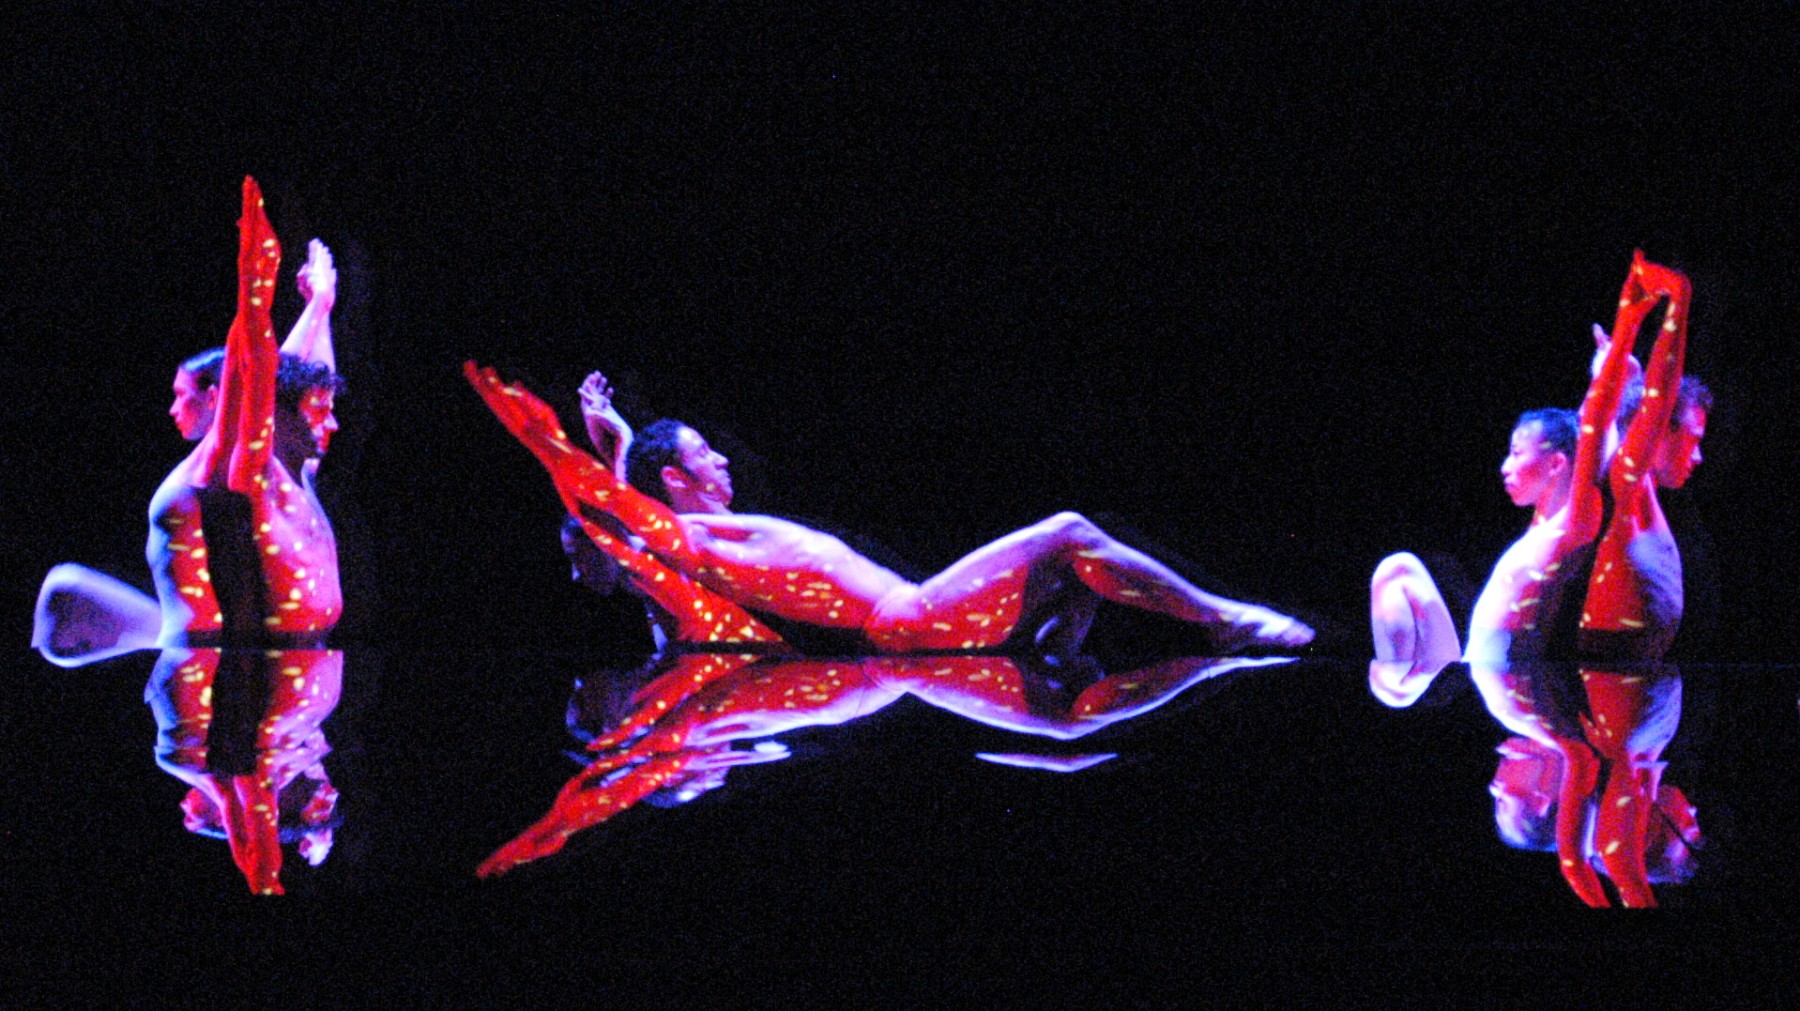 Red and yellow light is projected on dancers' skins as they stand back to back with their arms extended